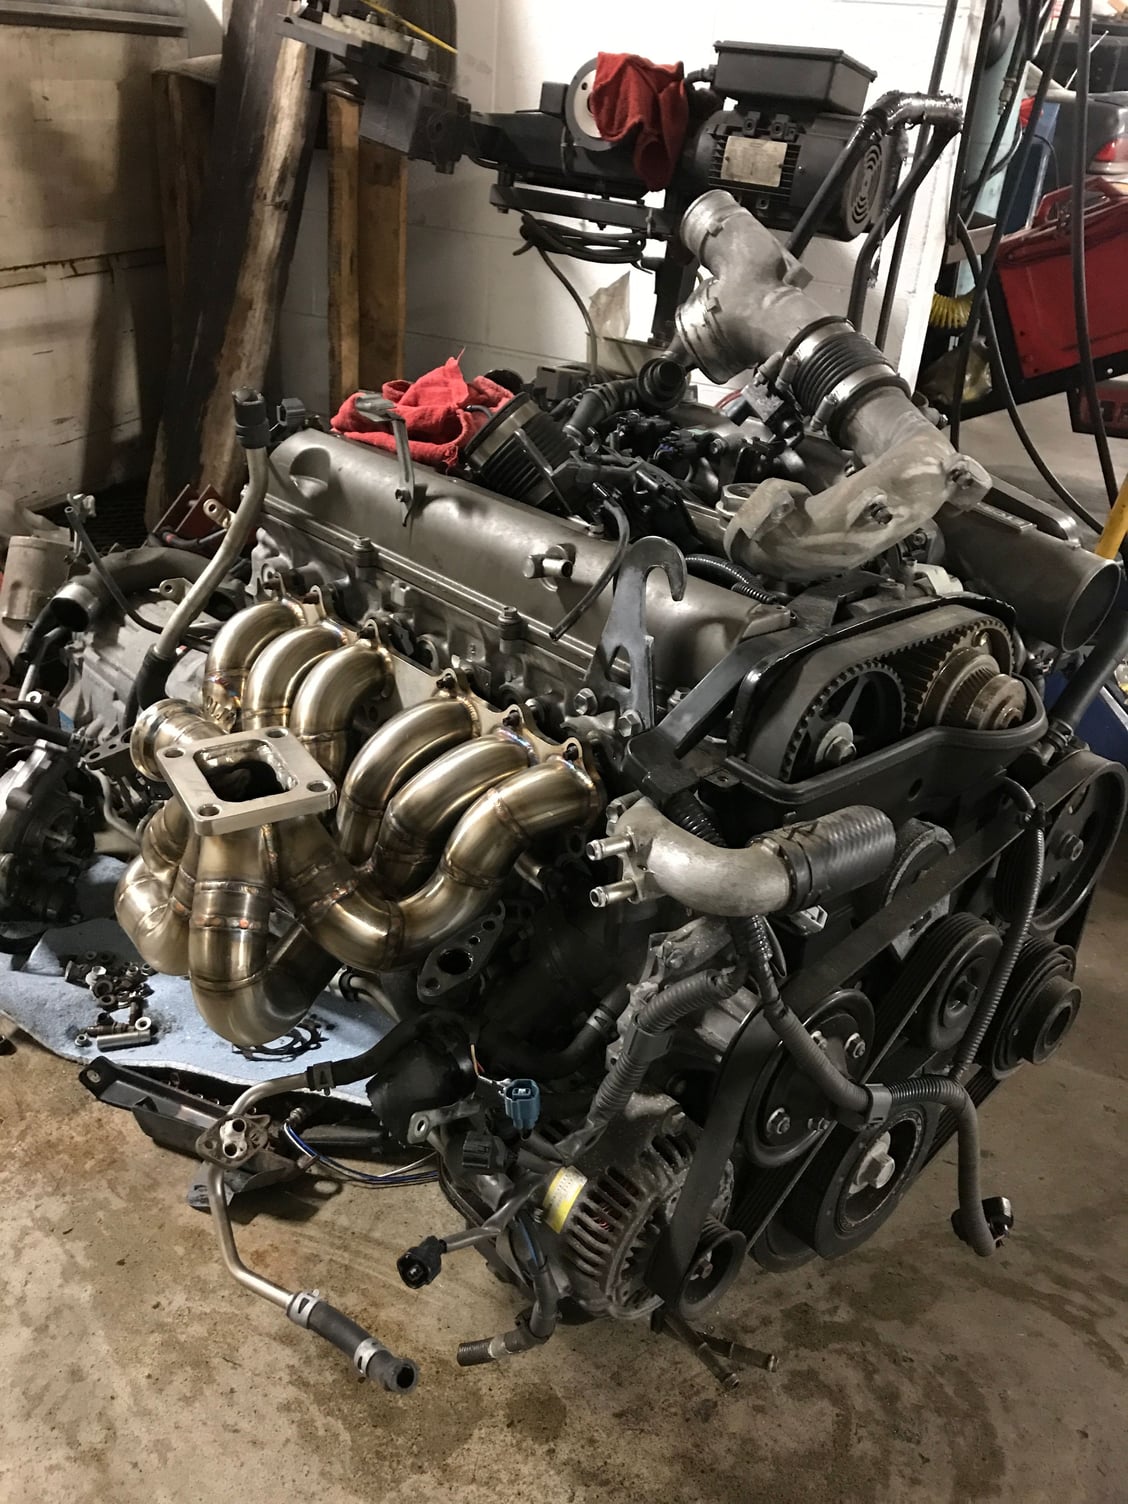 Miscellaneous - MEGA 2jz Parts Sale, CCW, Grannas Racing, QUALITY - New - All Years Any Make All Models - Ashland, VA 23005, United States